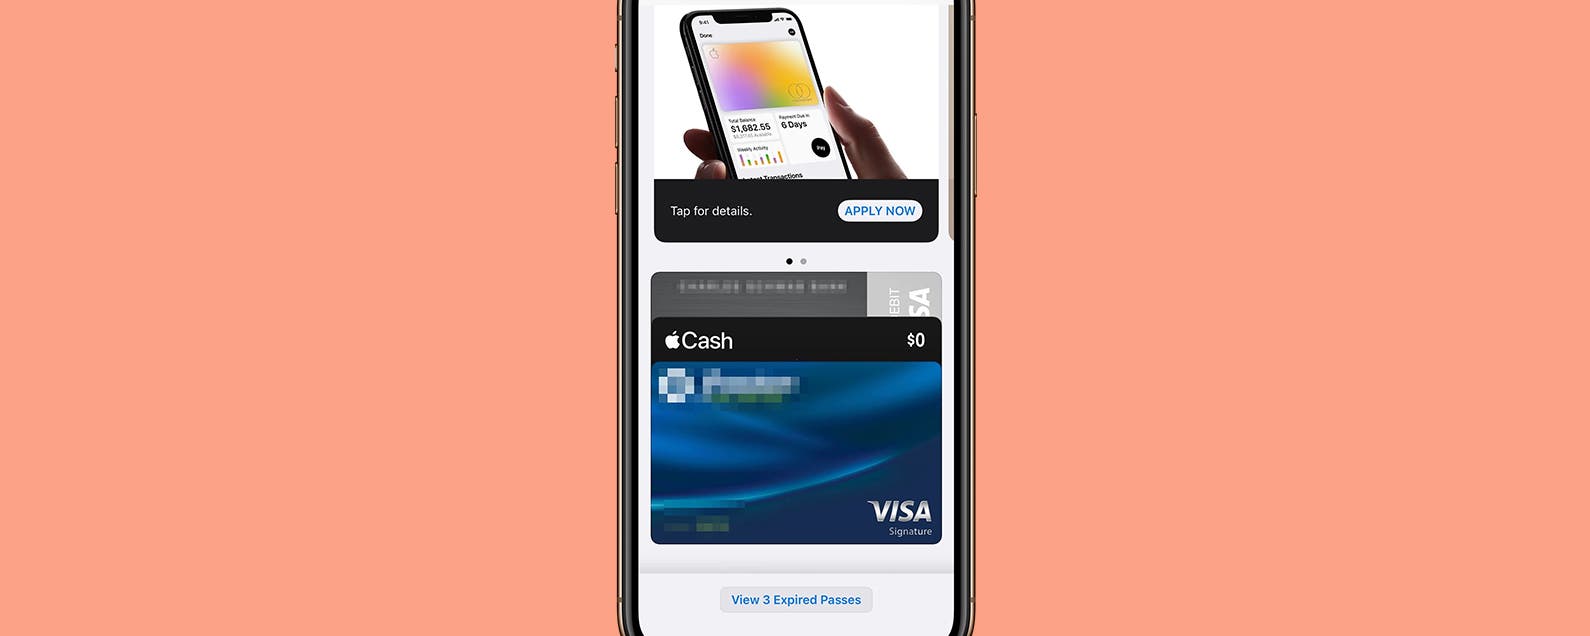 Can’t Add a Card to Apple Wallet? Here's How To Fix That - The Mac Observer